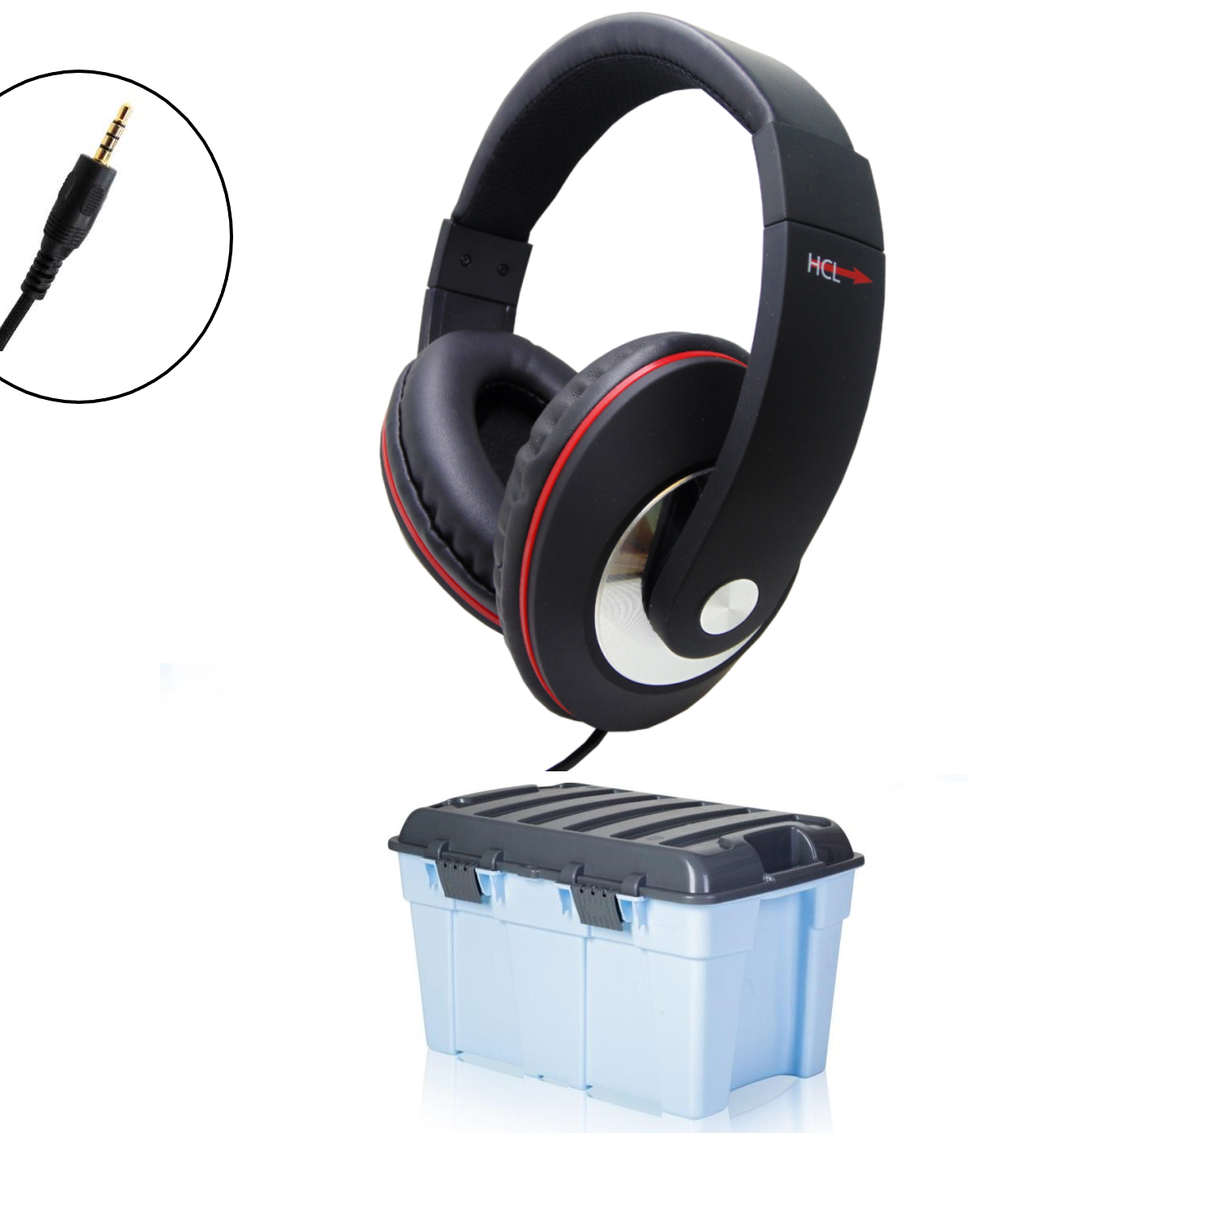 Classroom Headphone Set (32 Over Ear Deluxe Headphone - 4 pole with In-line Mic)